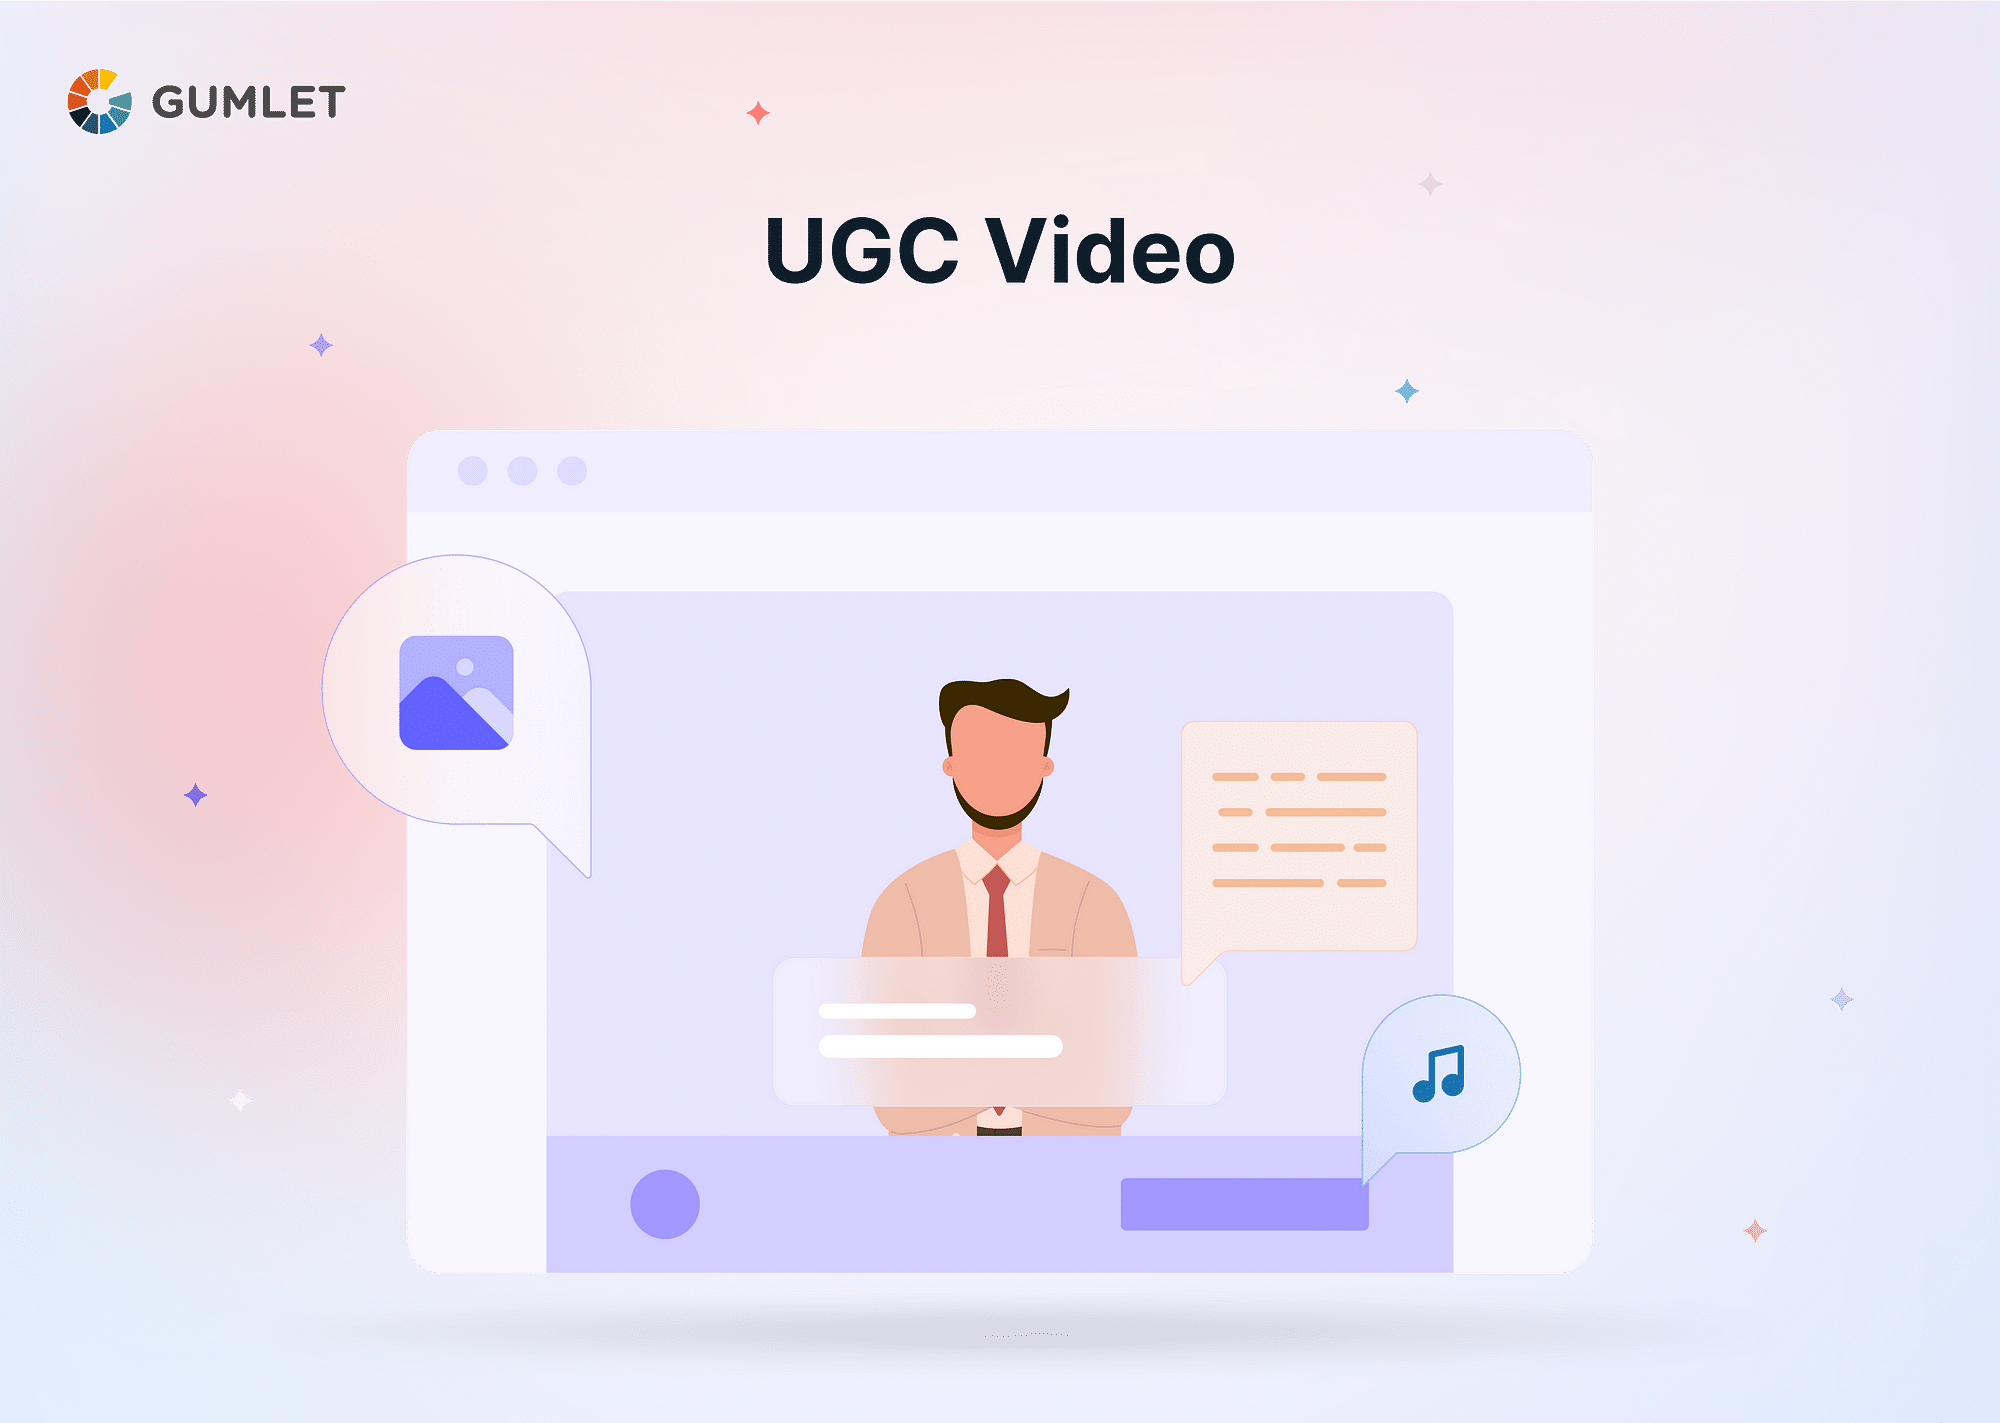 How to Use UGC Video to Boost Your Business?